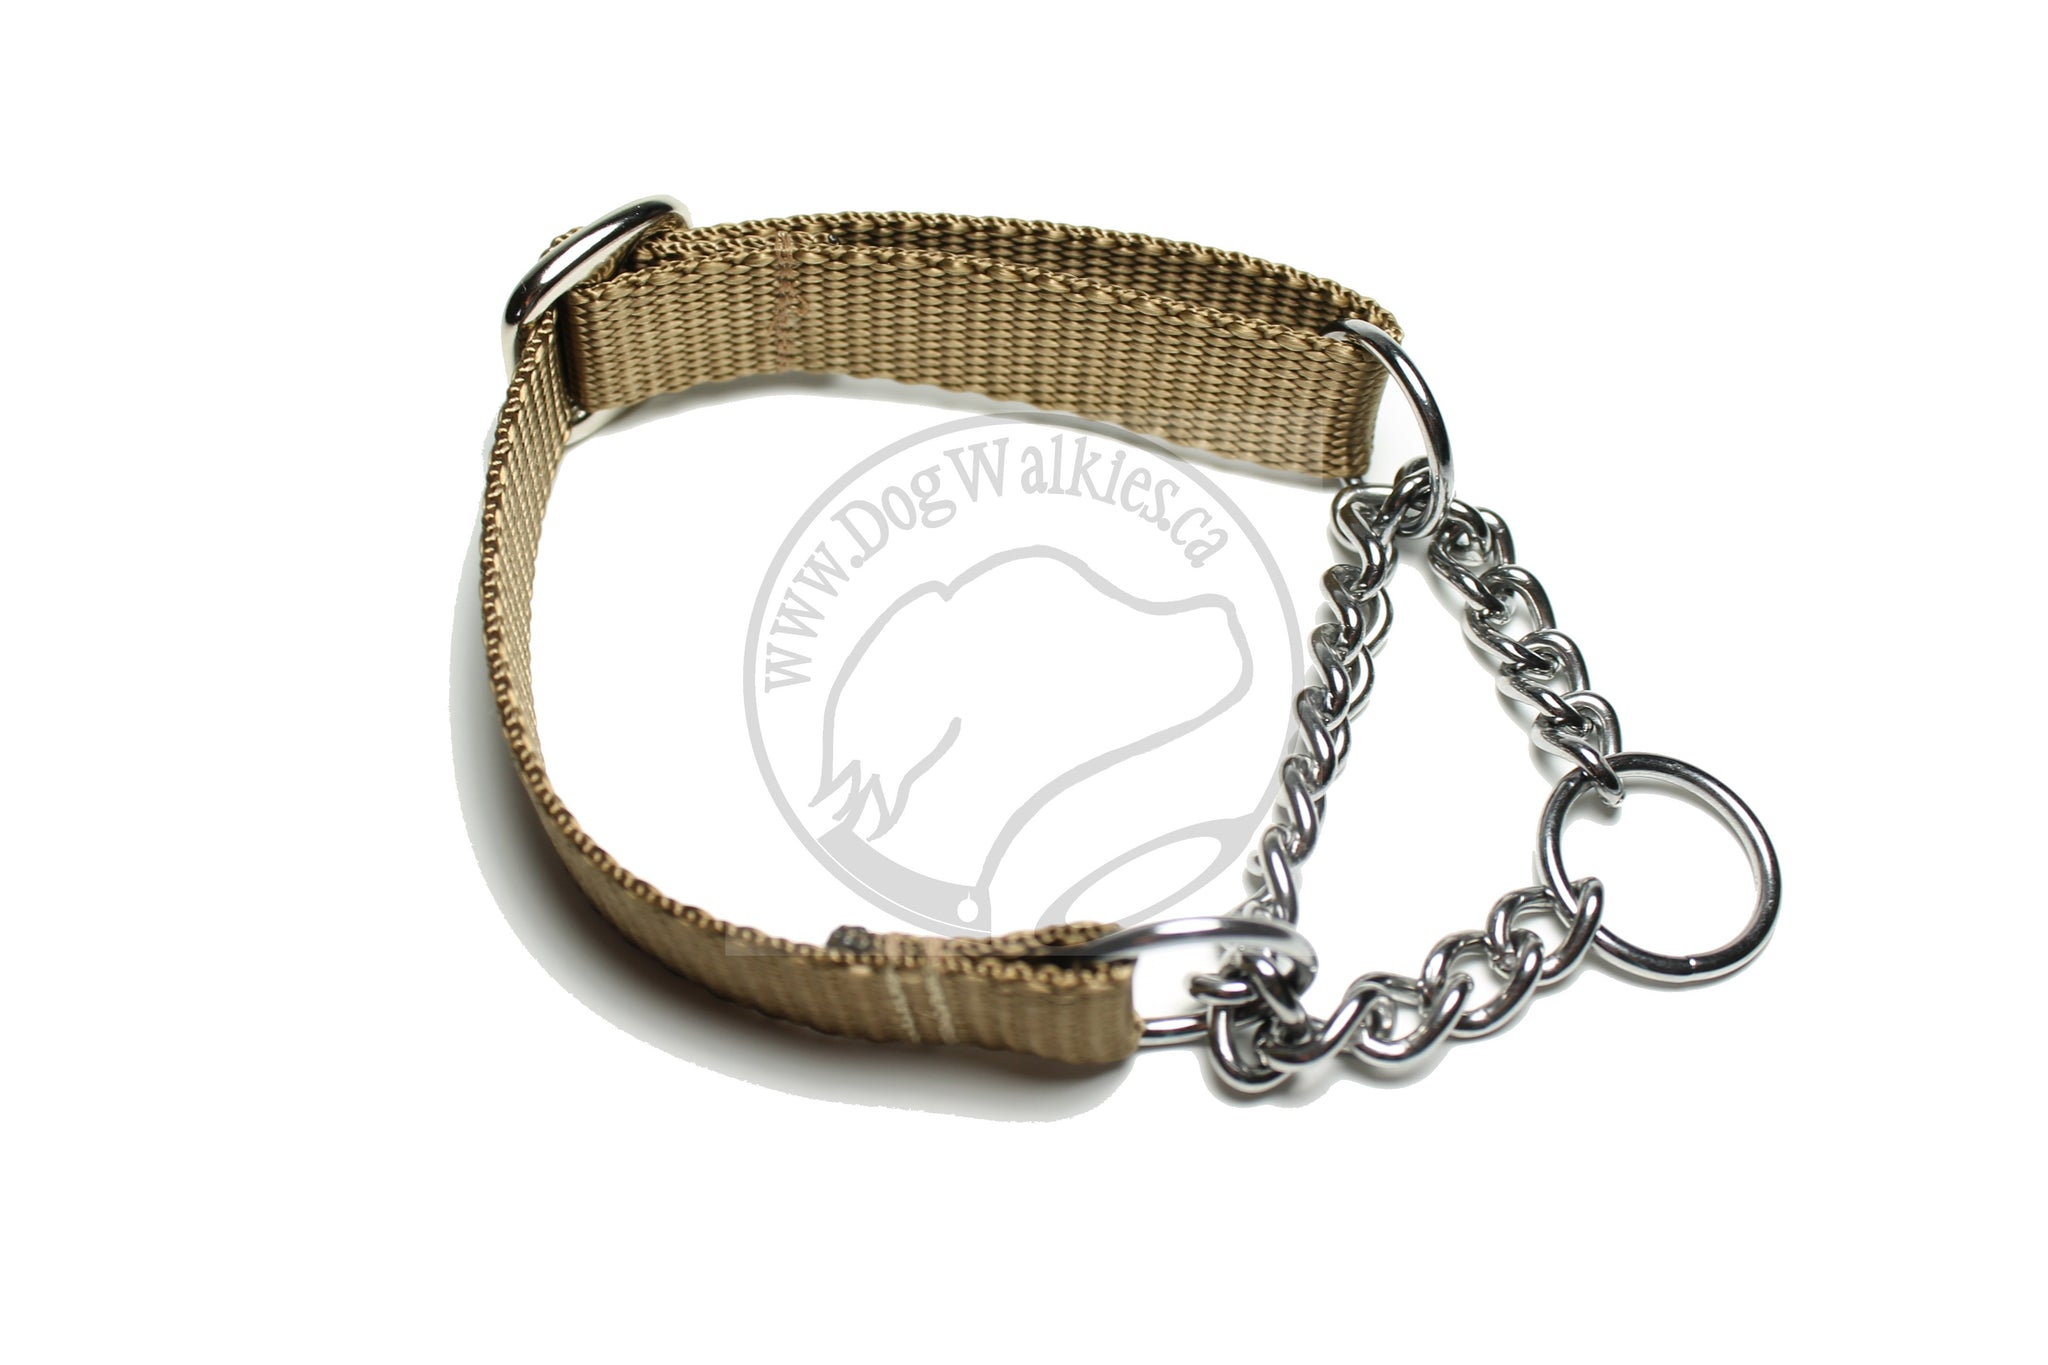 Chain Martingale Dog Collar 3/4" (19mm) wide; Simple - Elegant - Strong